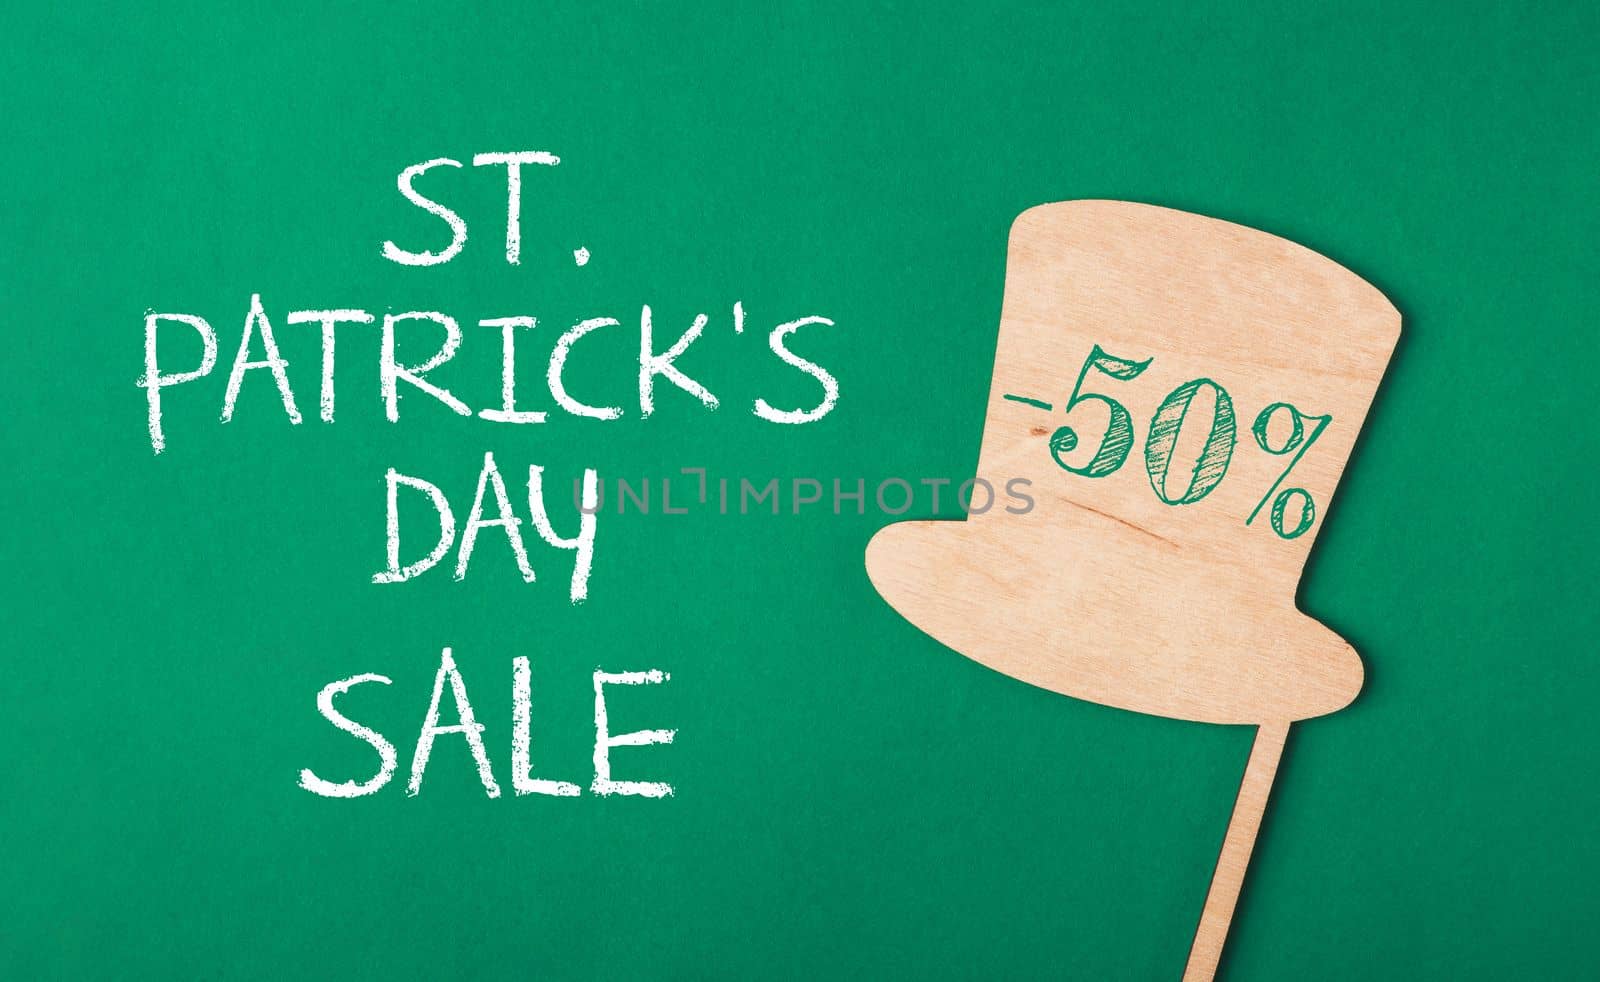 St. Patrick's Day Sale - 50 off. Banner on green background with hat and quatrefoil